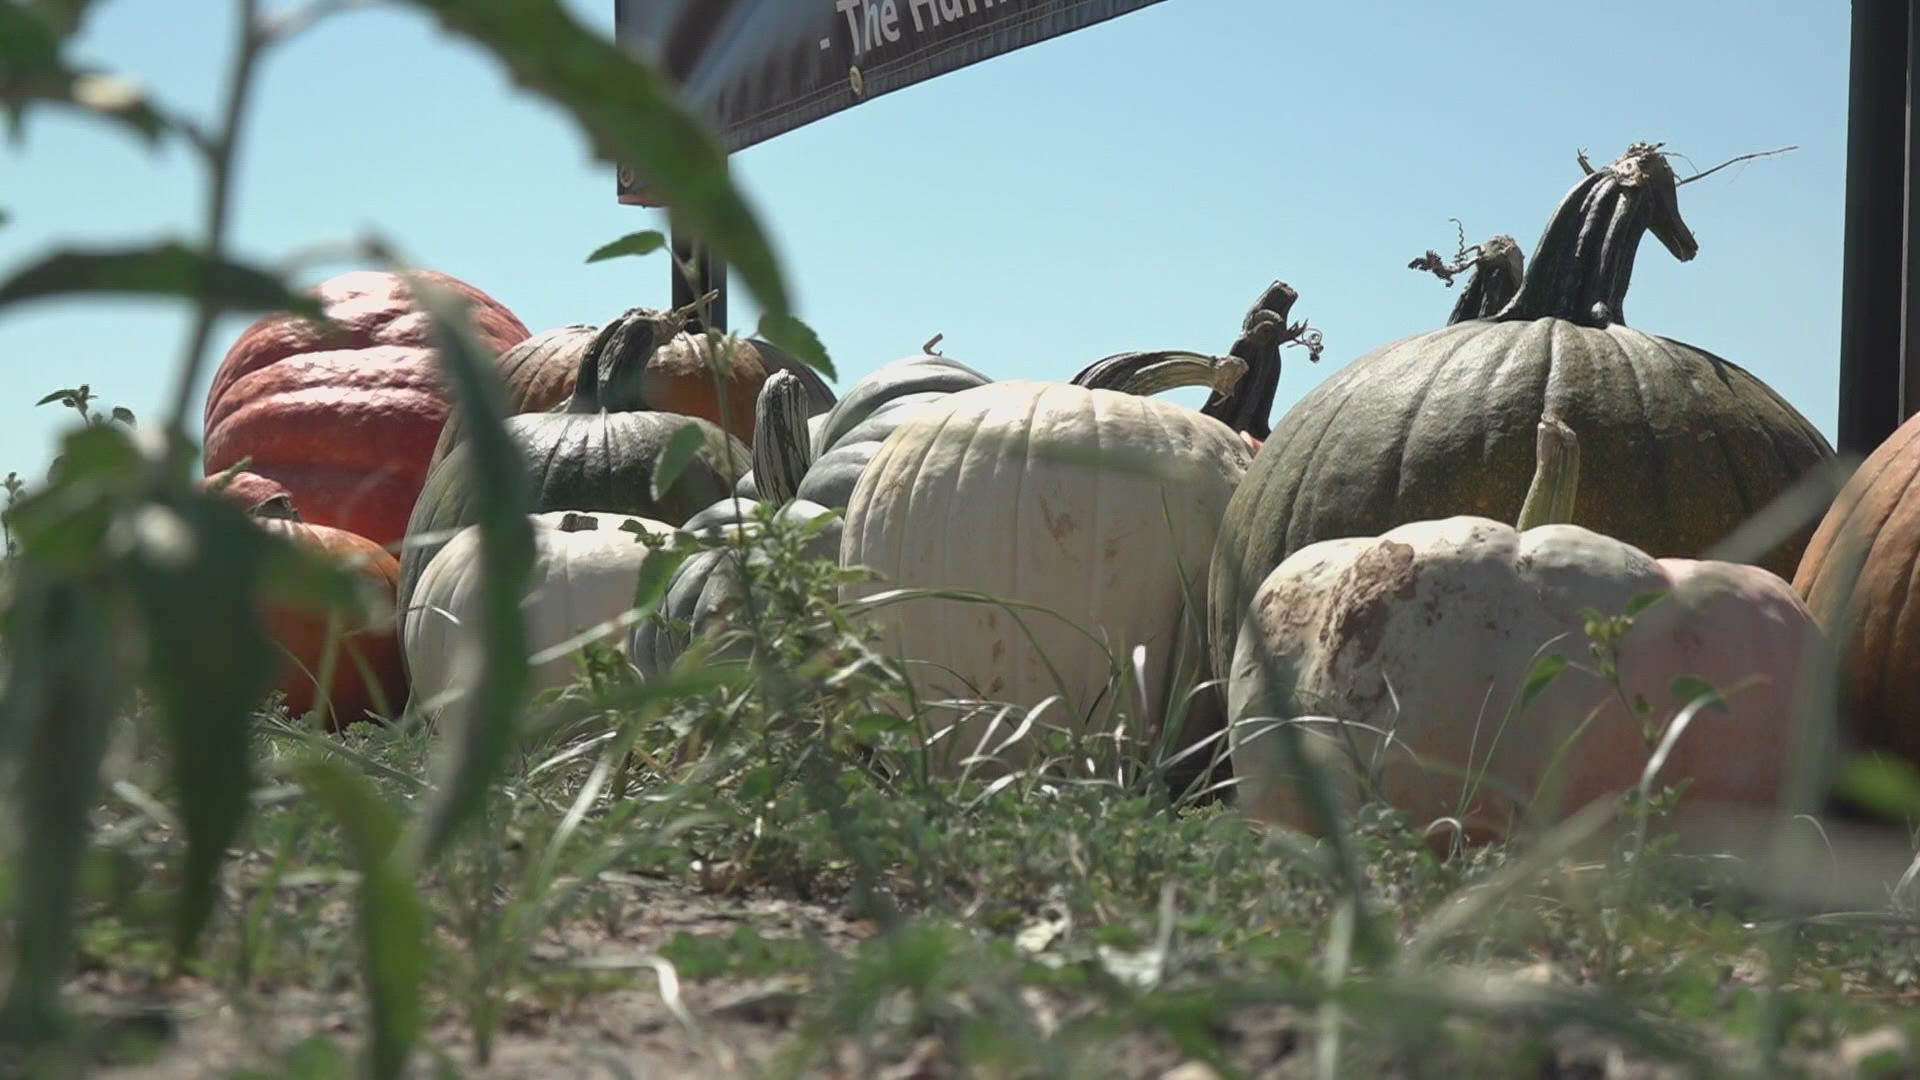 Some farmers aren't able to harvest their own pumpkins because of the lack of rain.